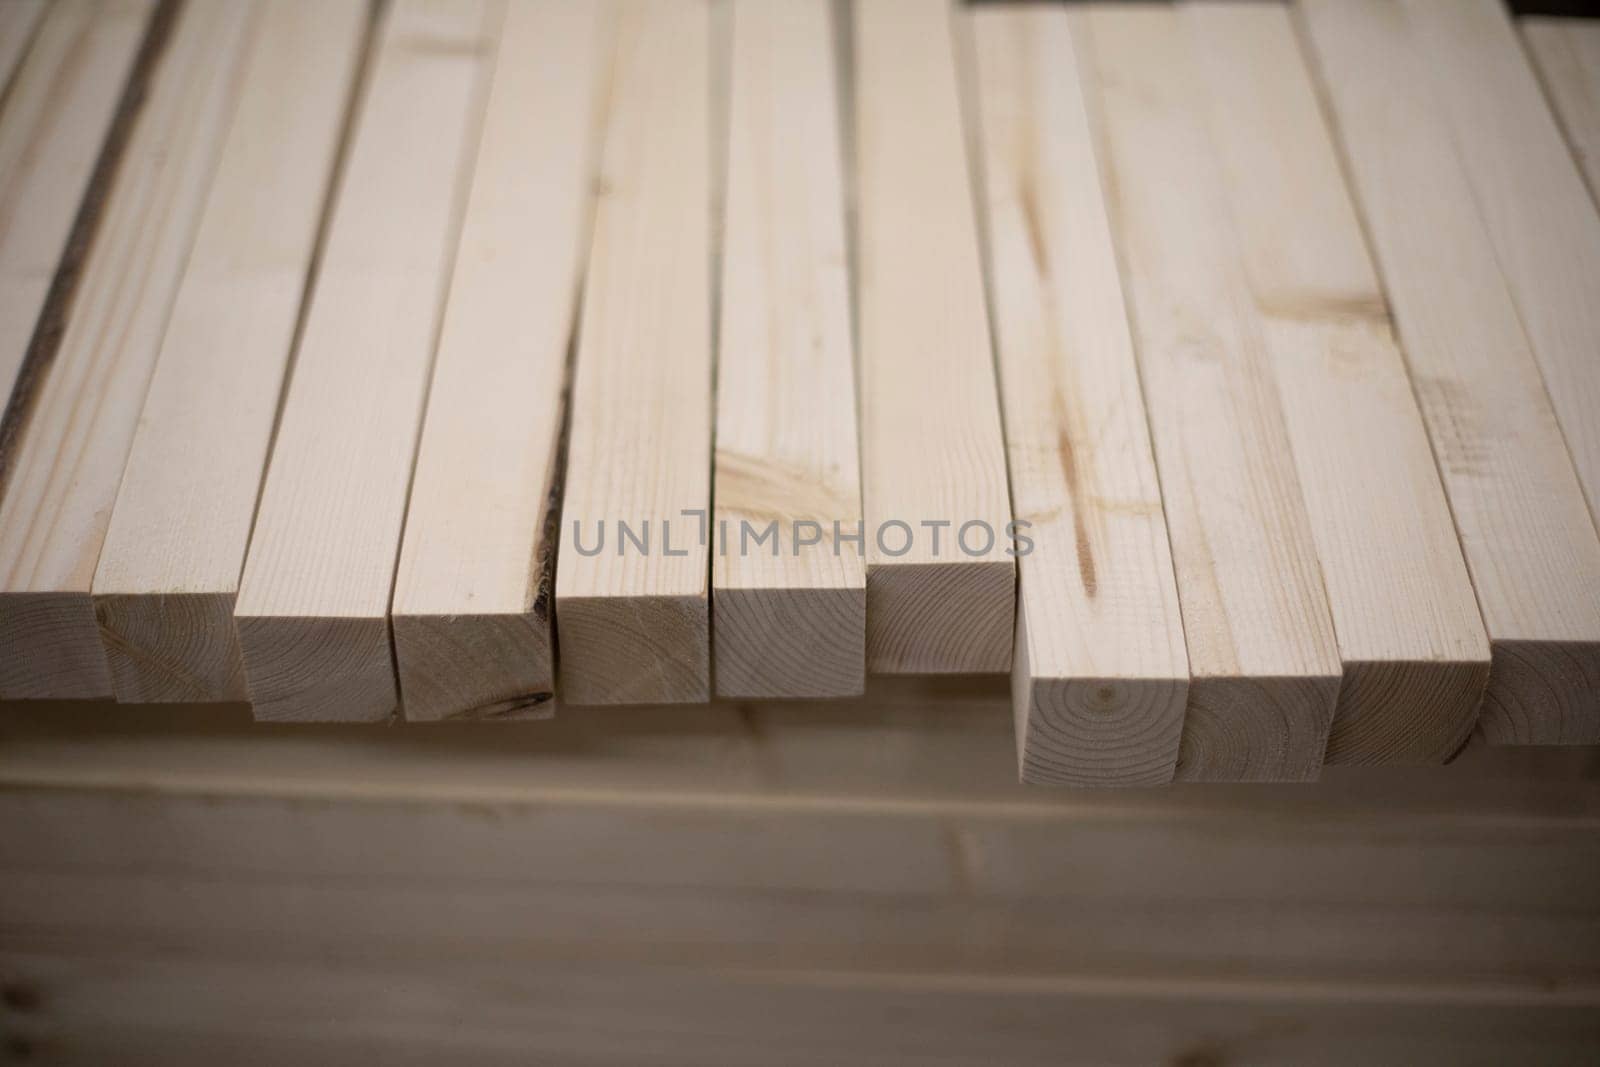 Boards in stock. Wooden blanks. Bars made of wood of light color. Details of steelwork.